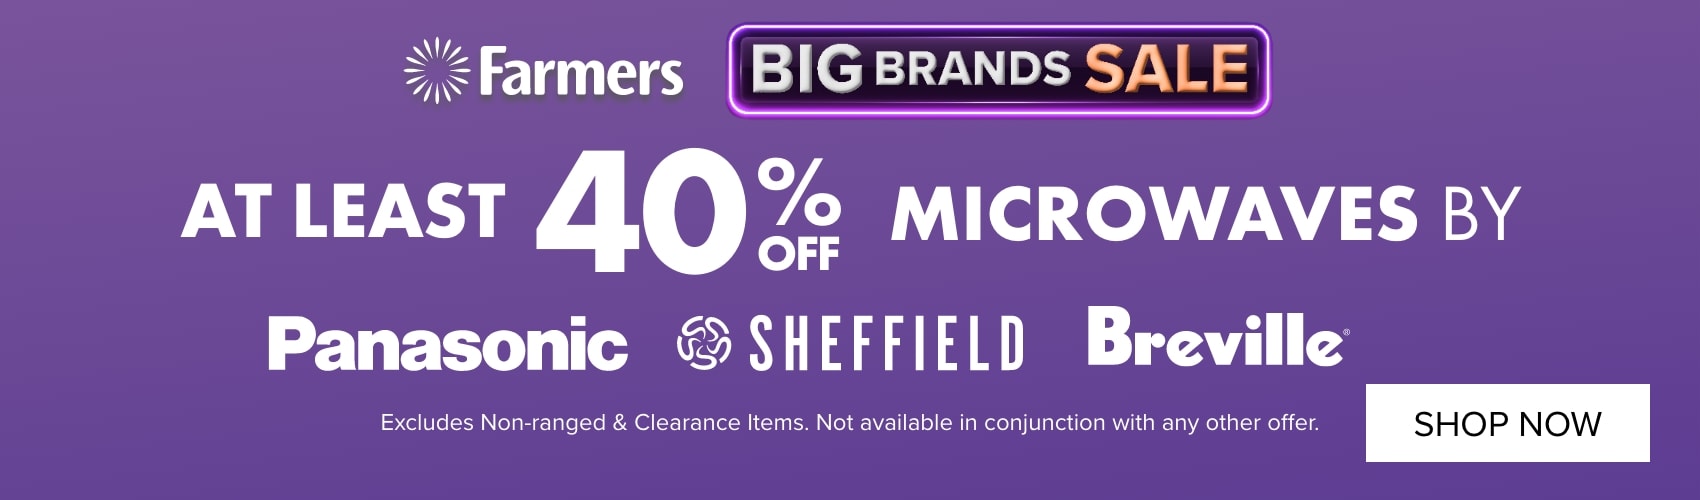 AT LEAST 40% OFF Microwaves by Panasonic, Sheffield & Breville